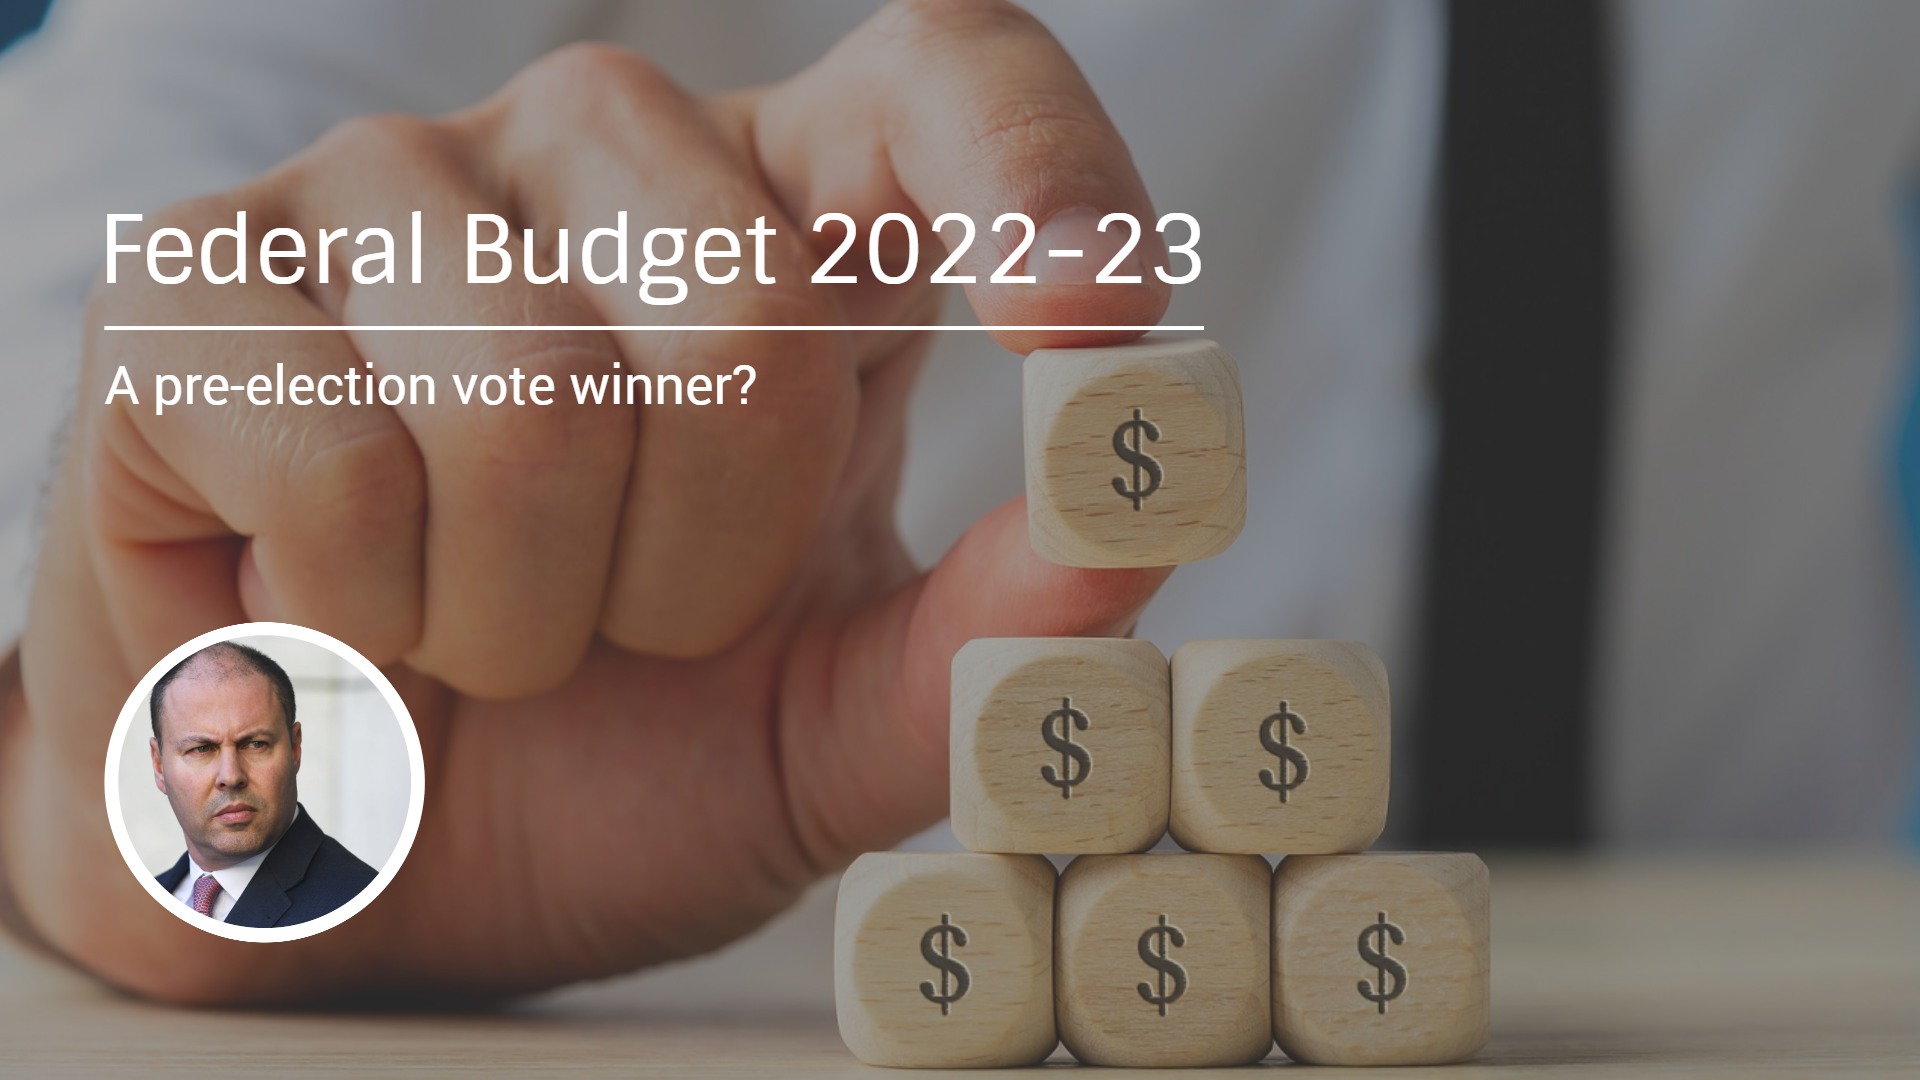 Federal Budget 2022-23: Key implications of this Year’s Budget